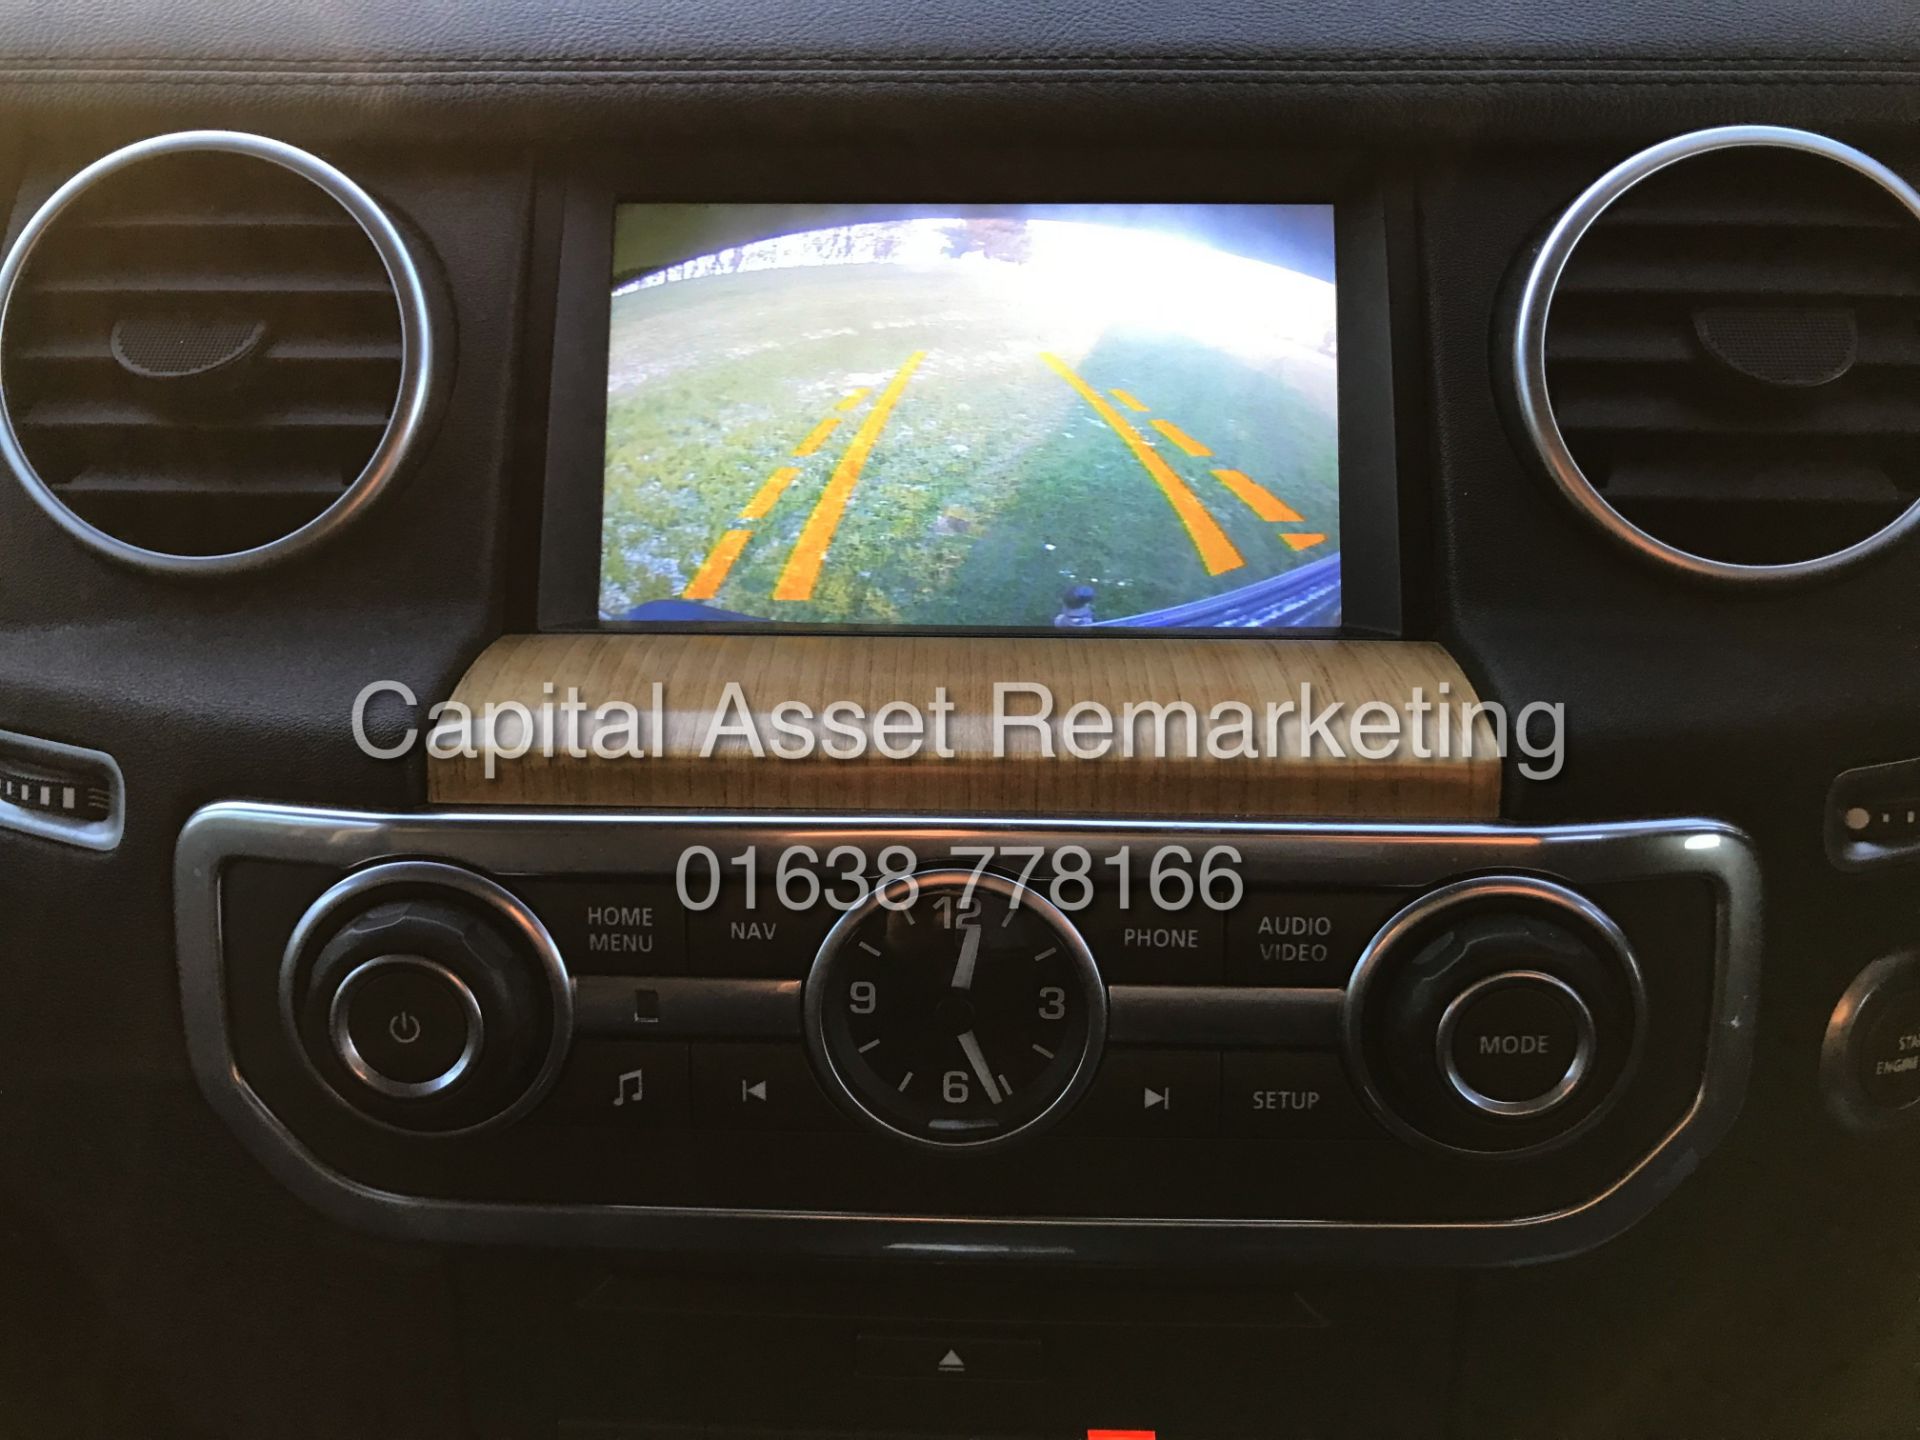 (ON SALE) LAND ROVER DISCOVERY 4 "HSE" 3.0 SDV6 AUTO (13 REG) 7 SEATER - TOP SPEC - SAT NAV -LEATHER - Image 14 of 31